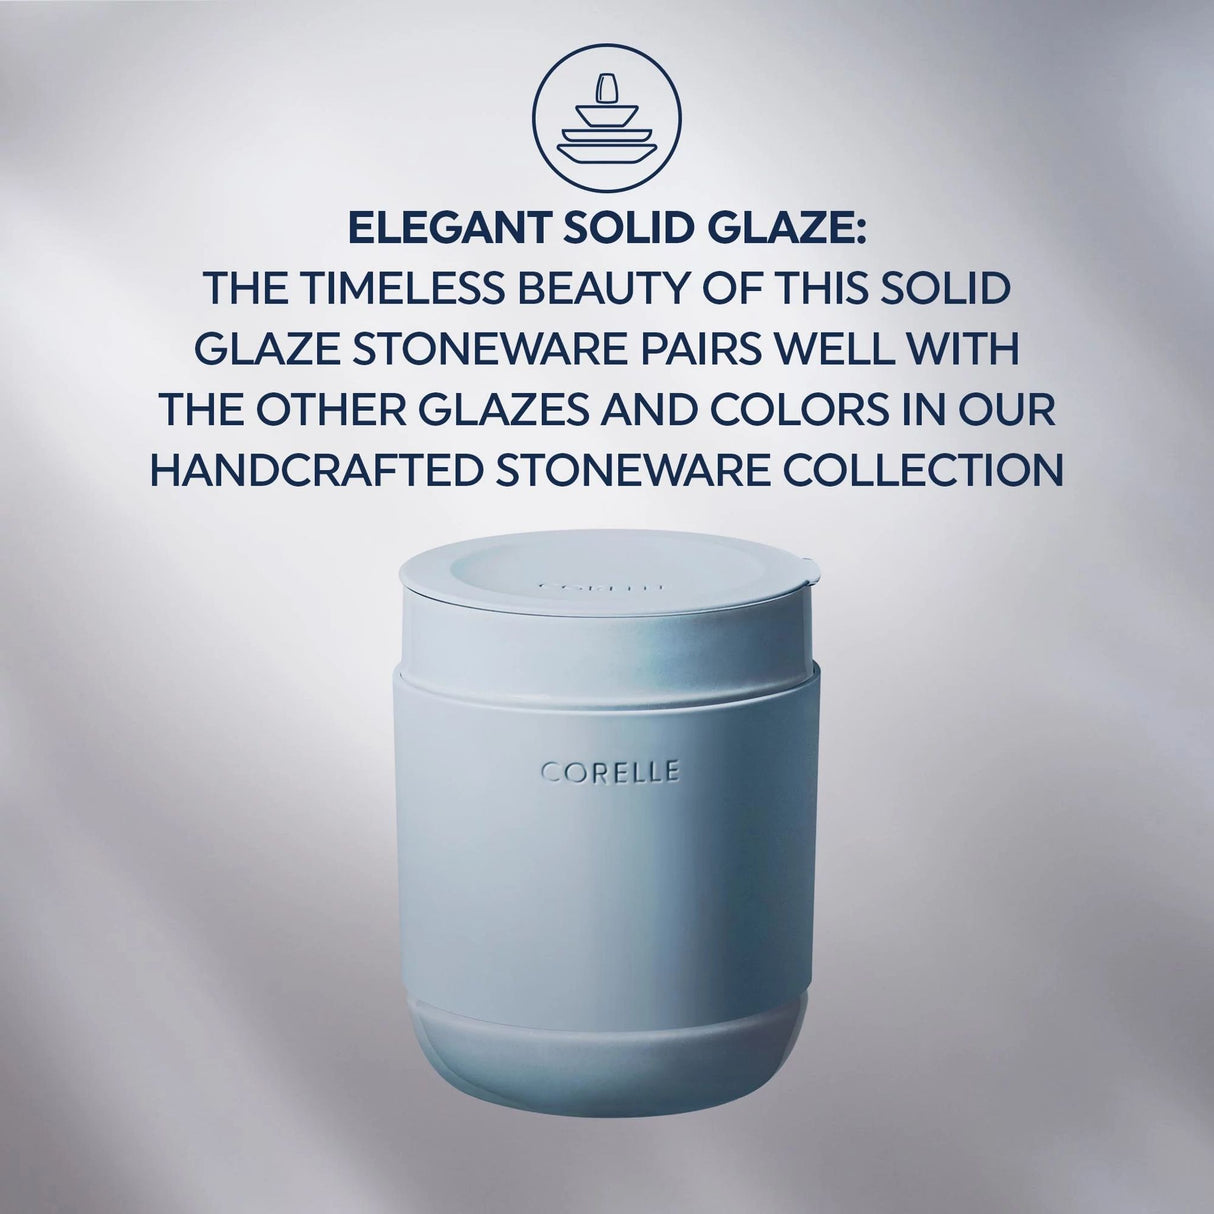  Text that says: Elegant solid glaze: The timeless beauty of this solid glaze stoneware pairs well with other glazes and colors